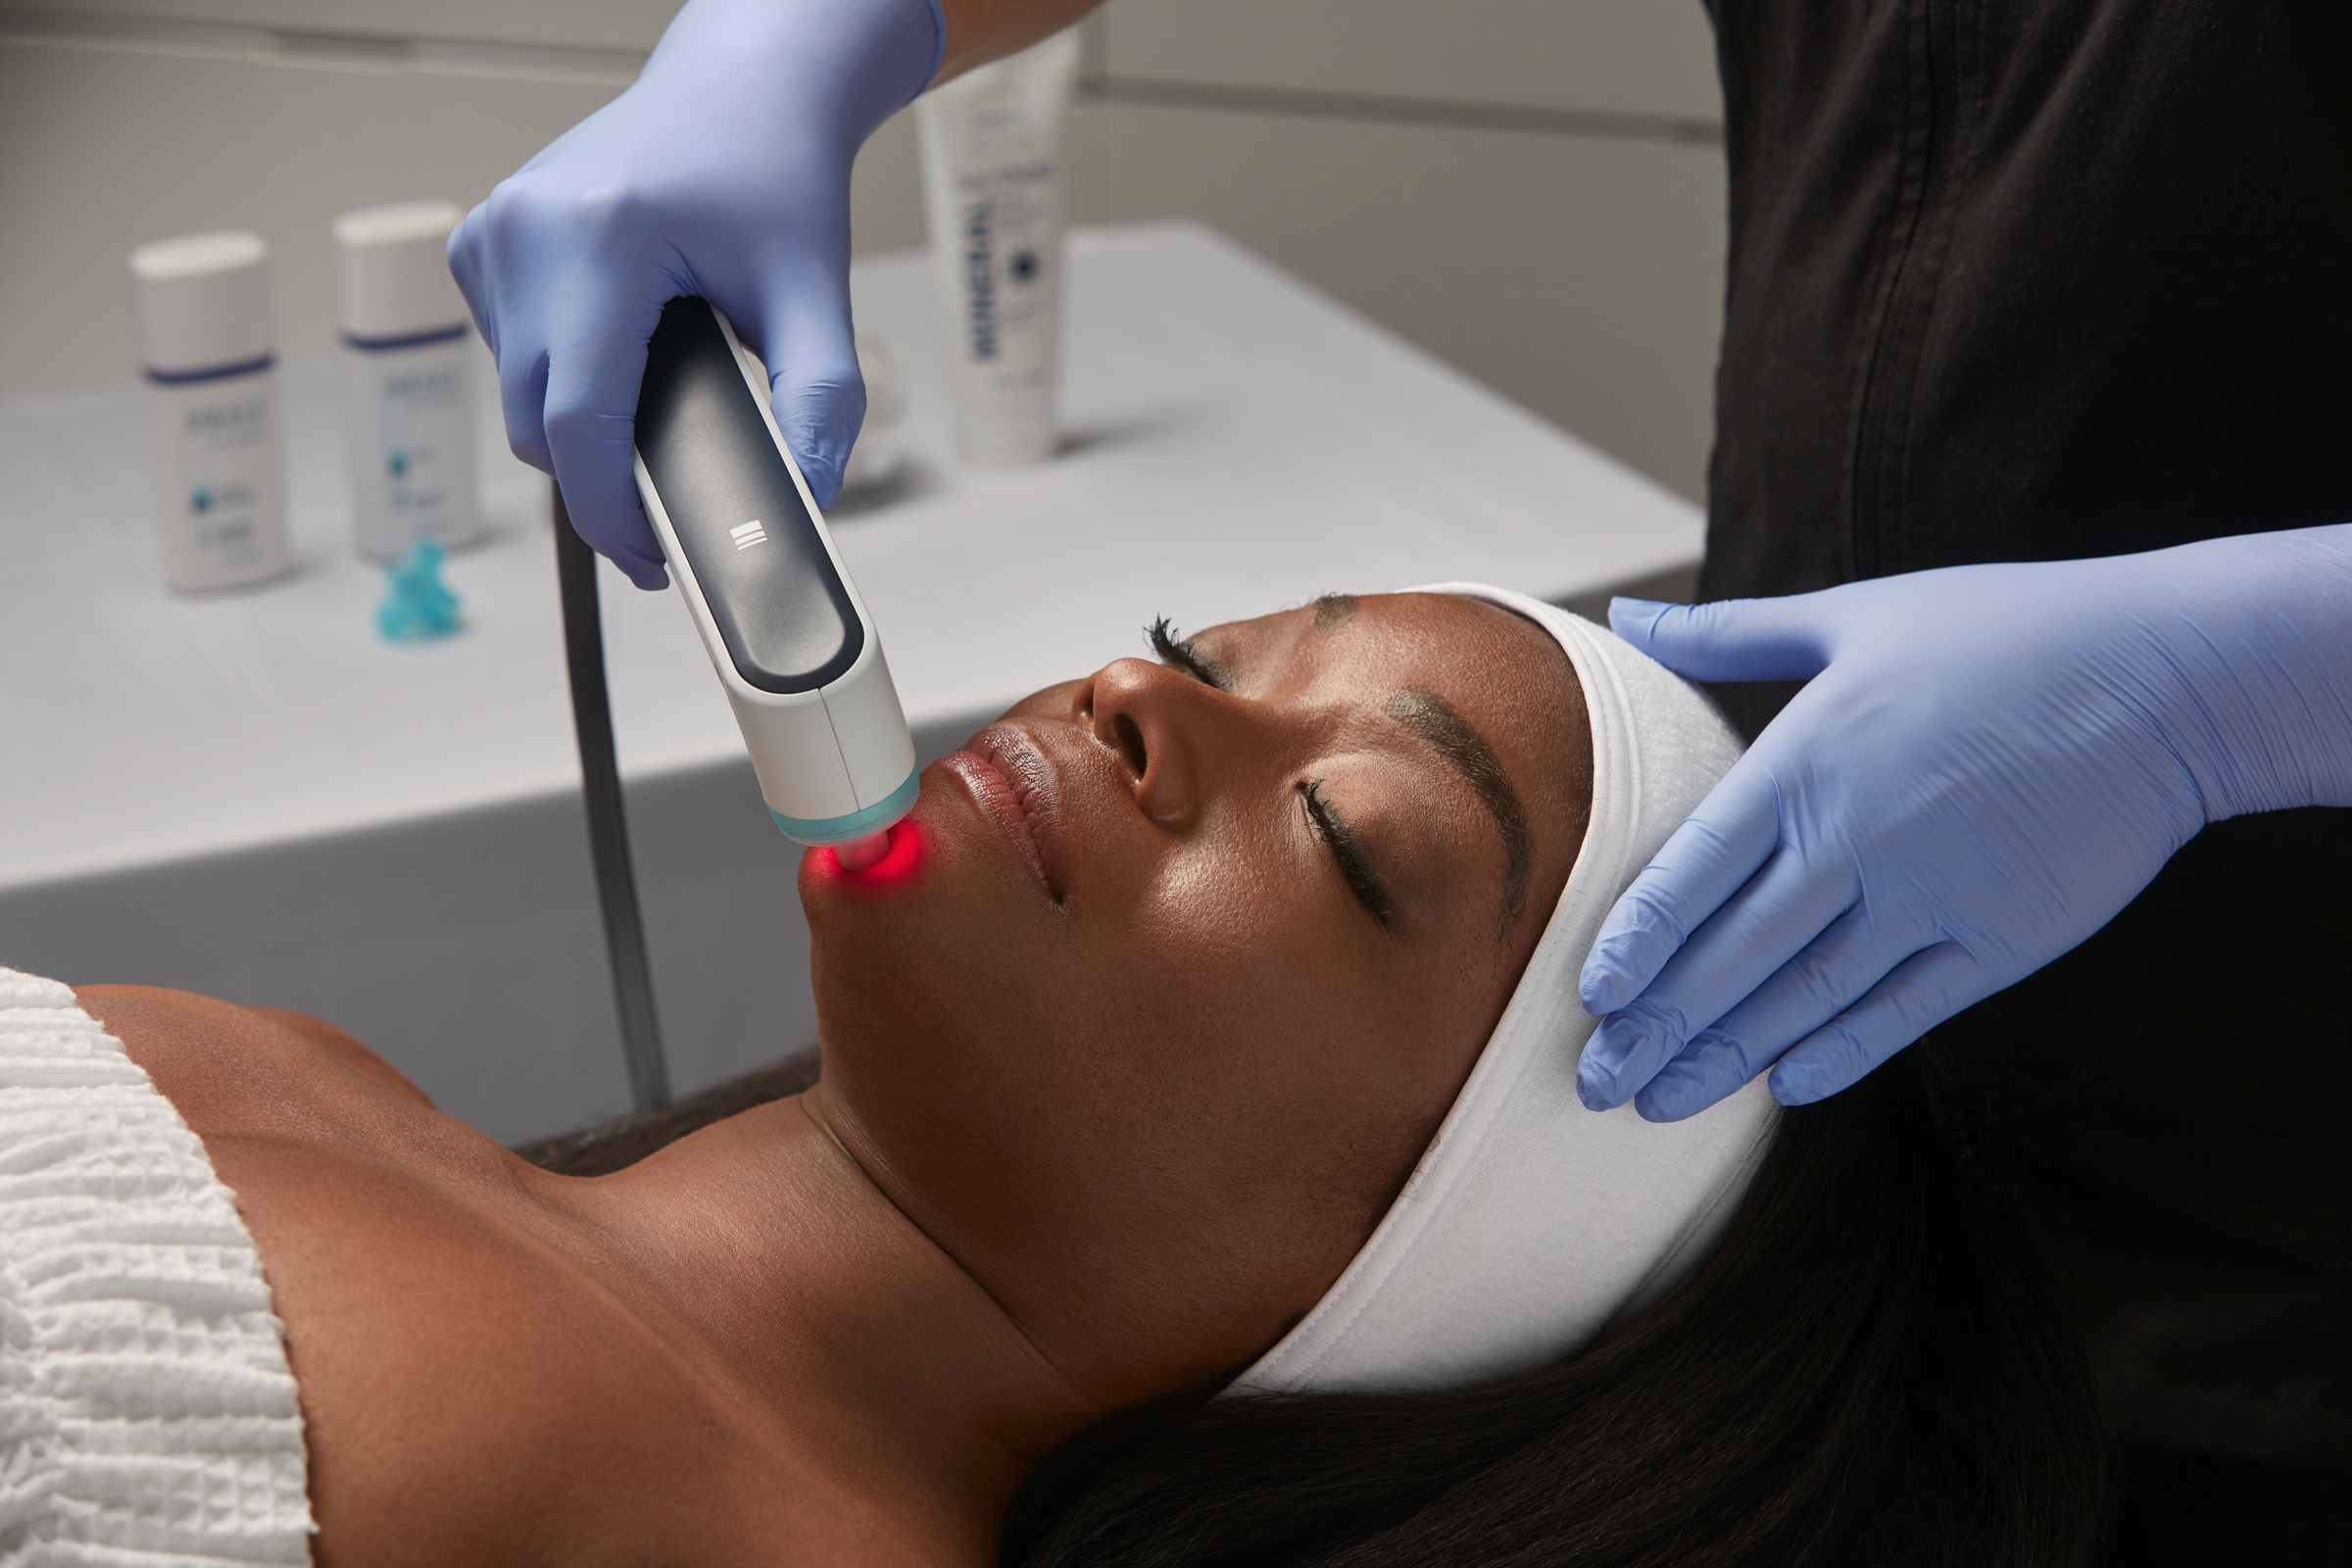 Obagi Skintrinsiq Facial Treatment with Red LED Light to infuse the power of Obagi skincare